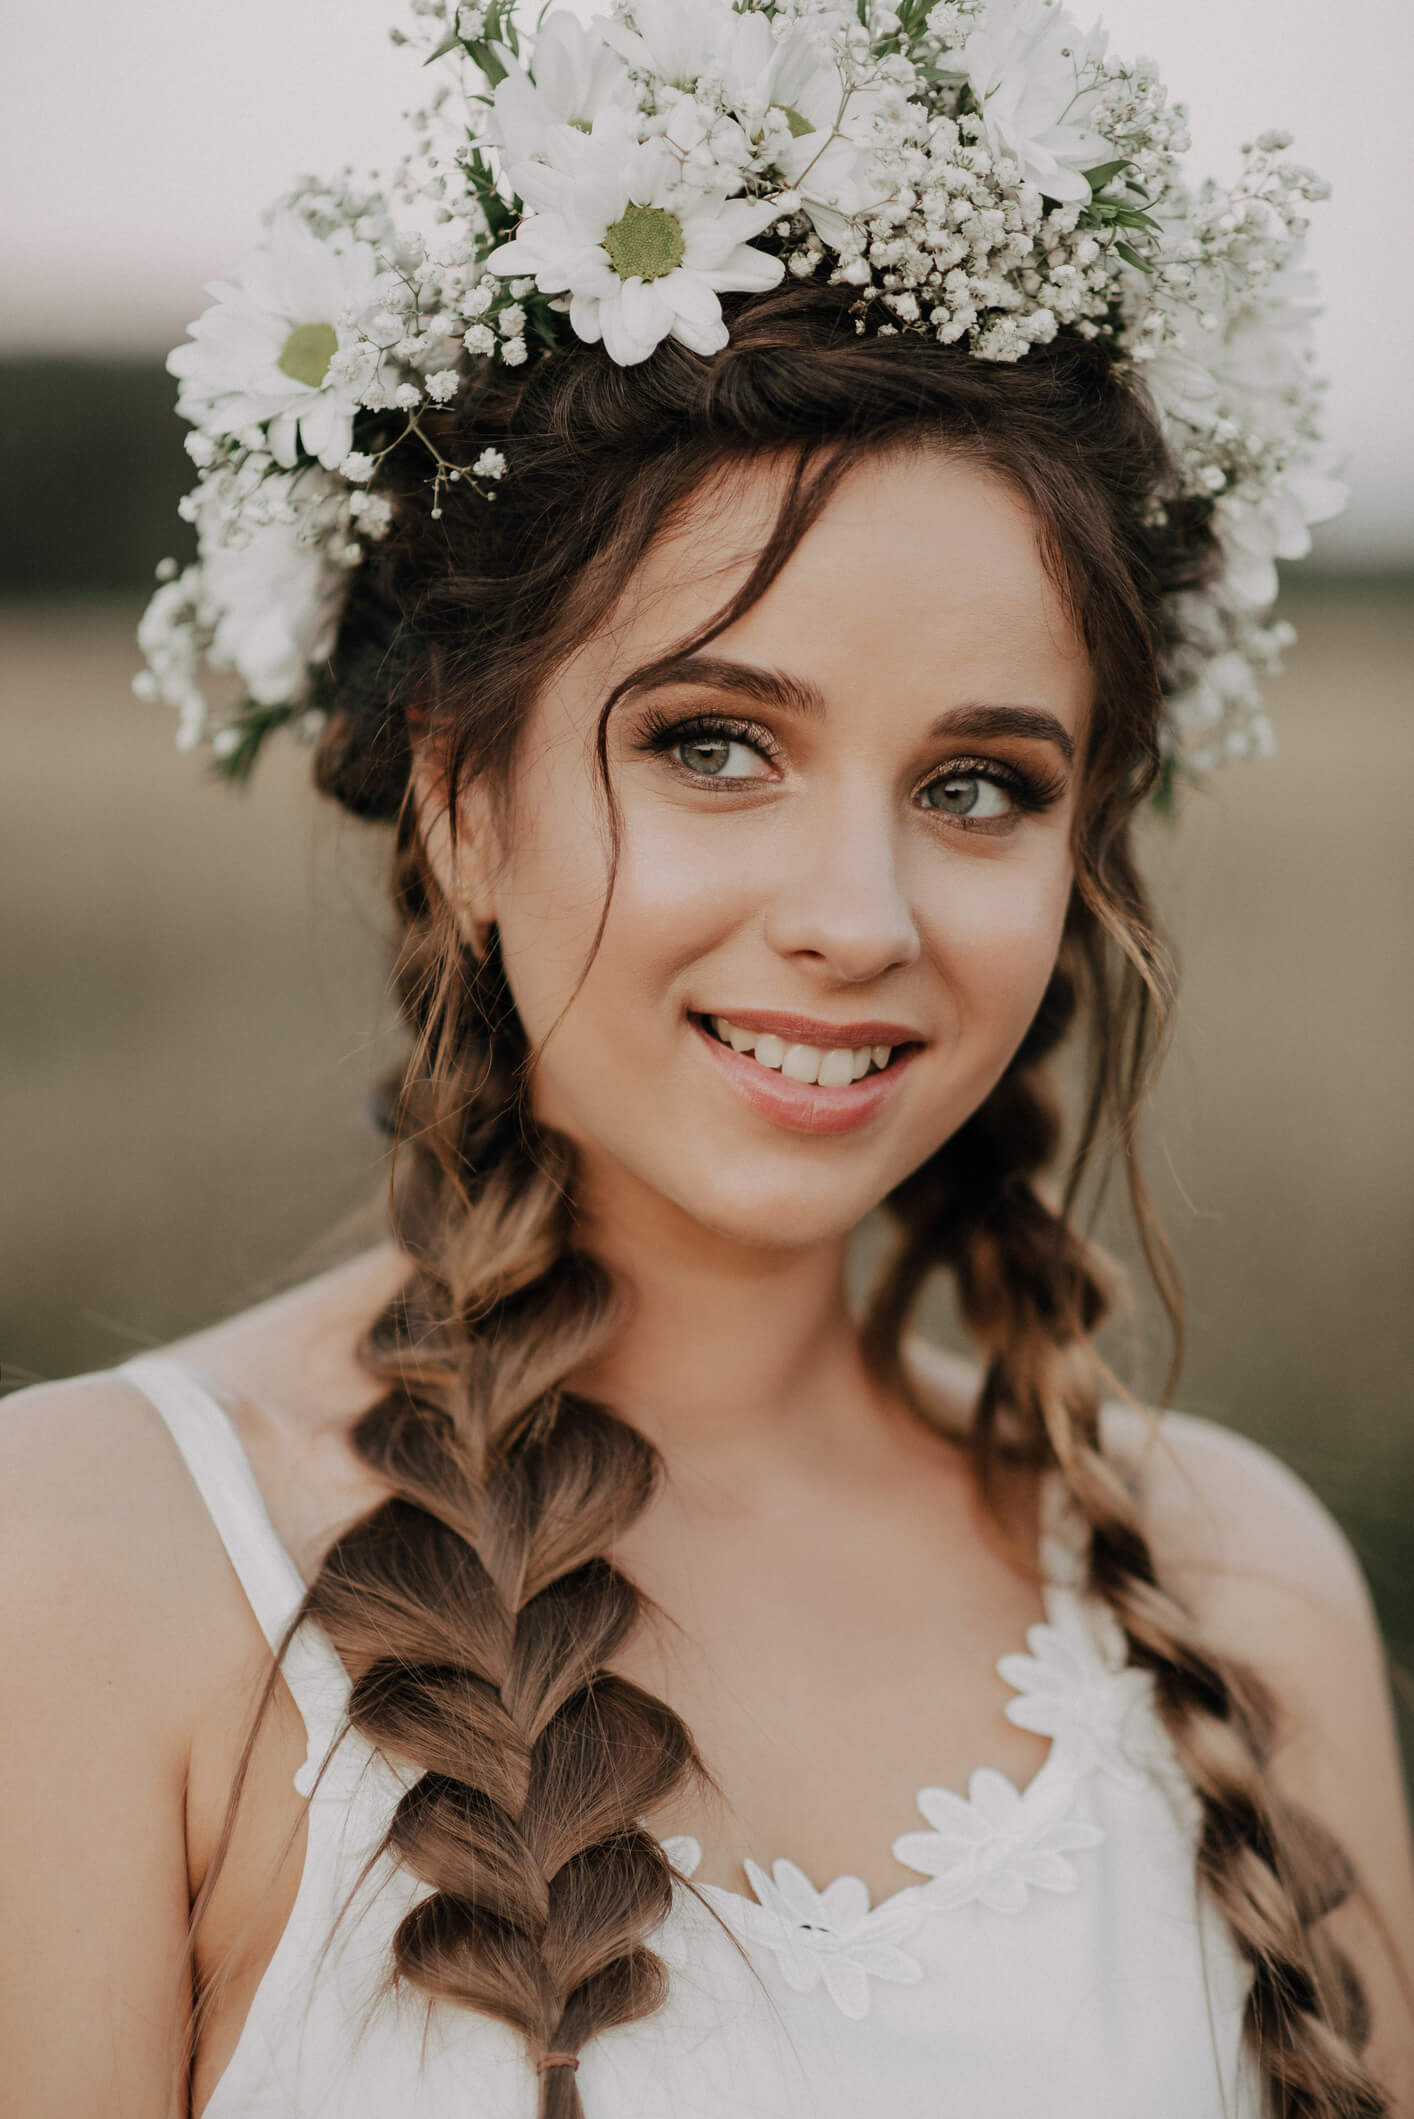 happy-smiling-girl-braids-floral-wreath-white-dress-boho-style-summer-outdoors-portrait-added-small-grain